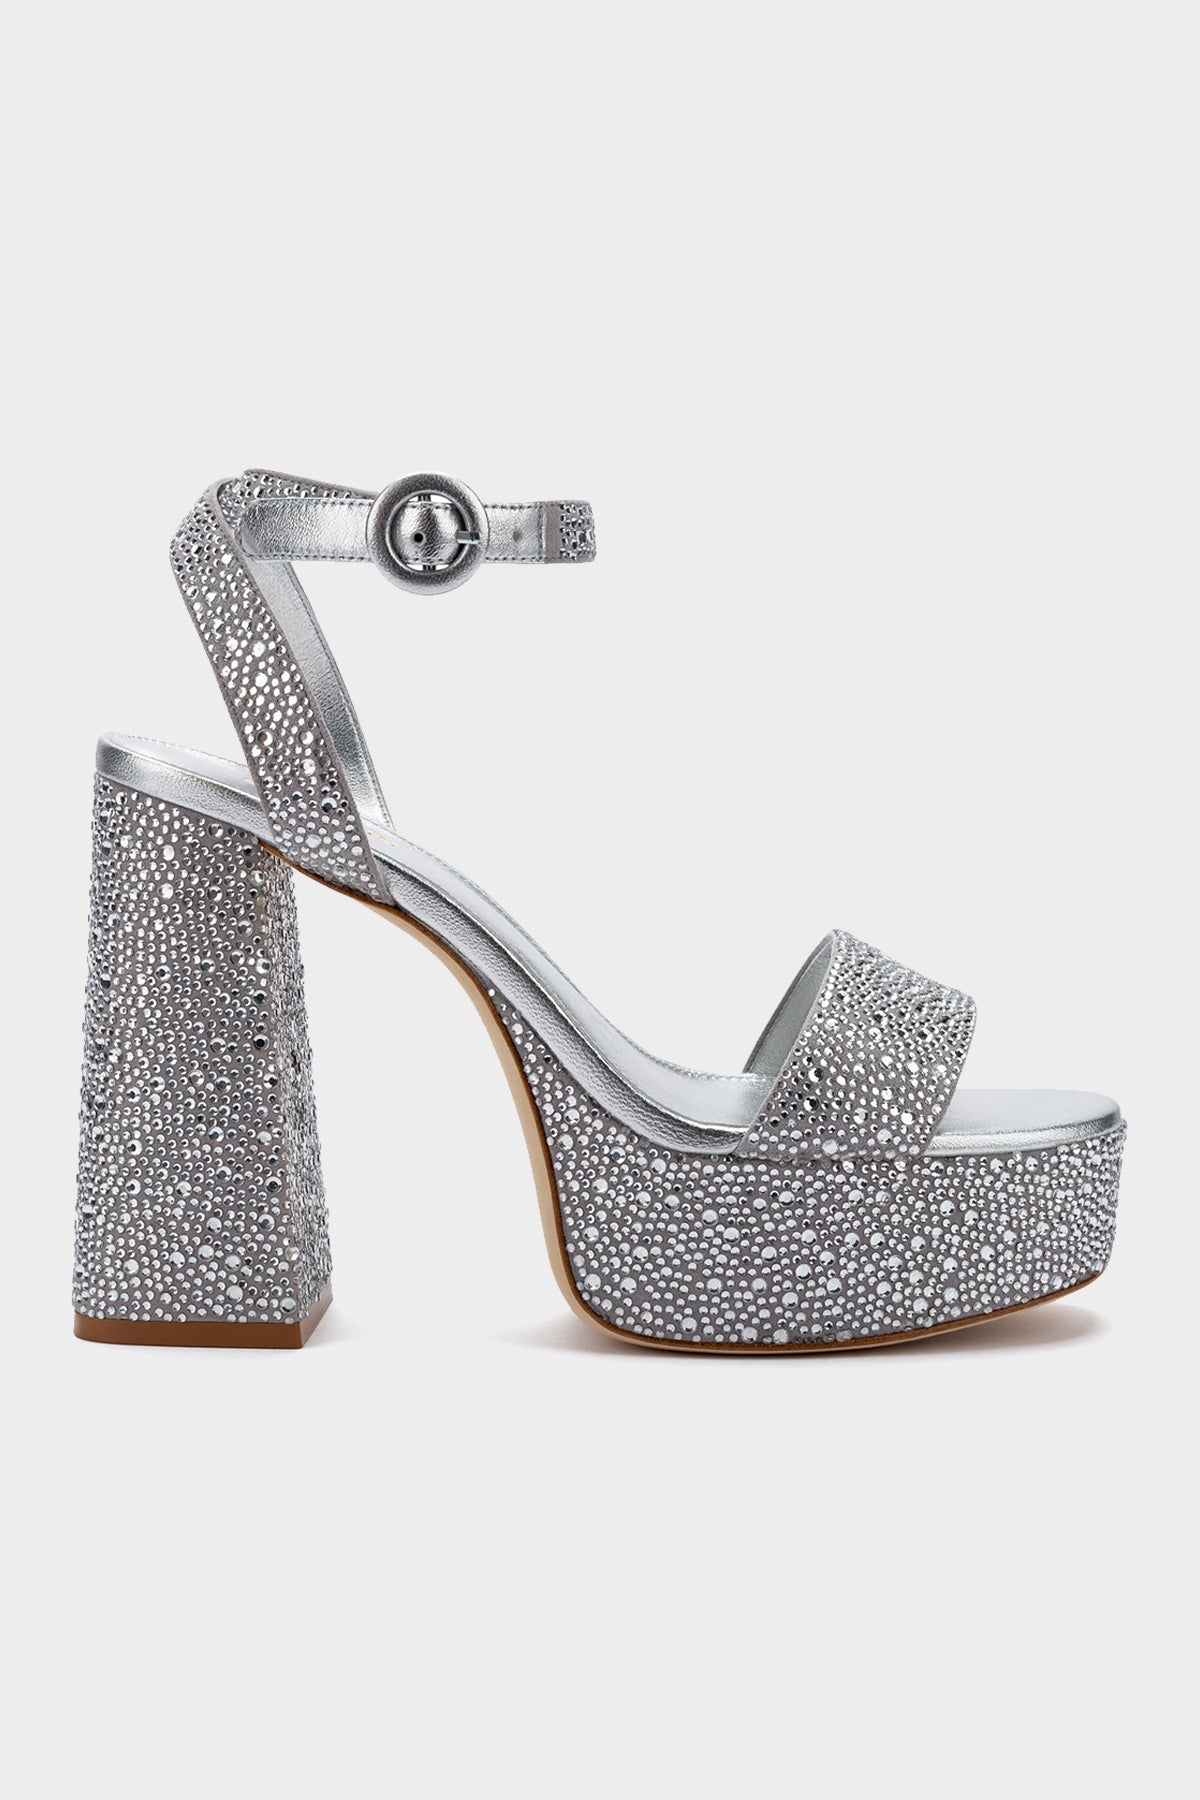 Dolly Crystal Sandal in Gray Suede - shop-olivia.com